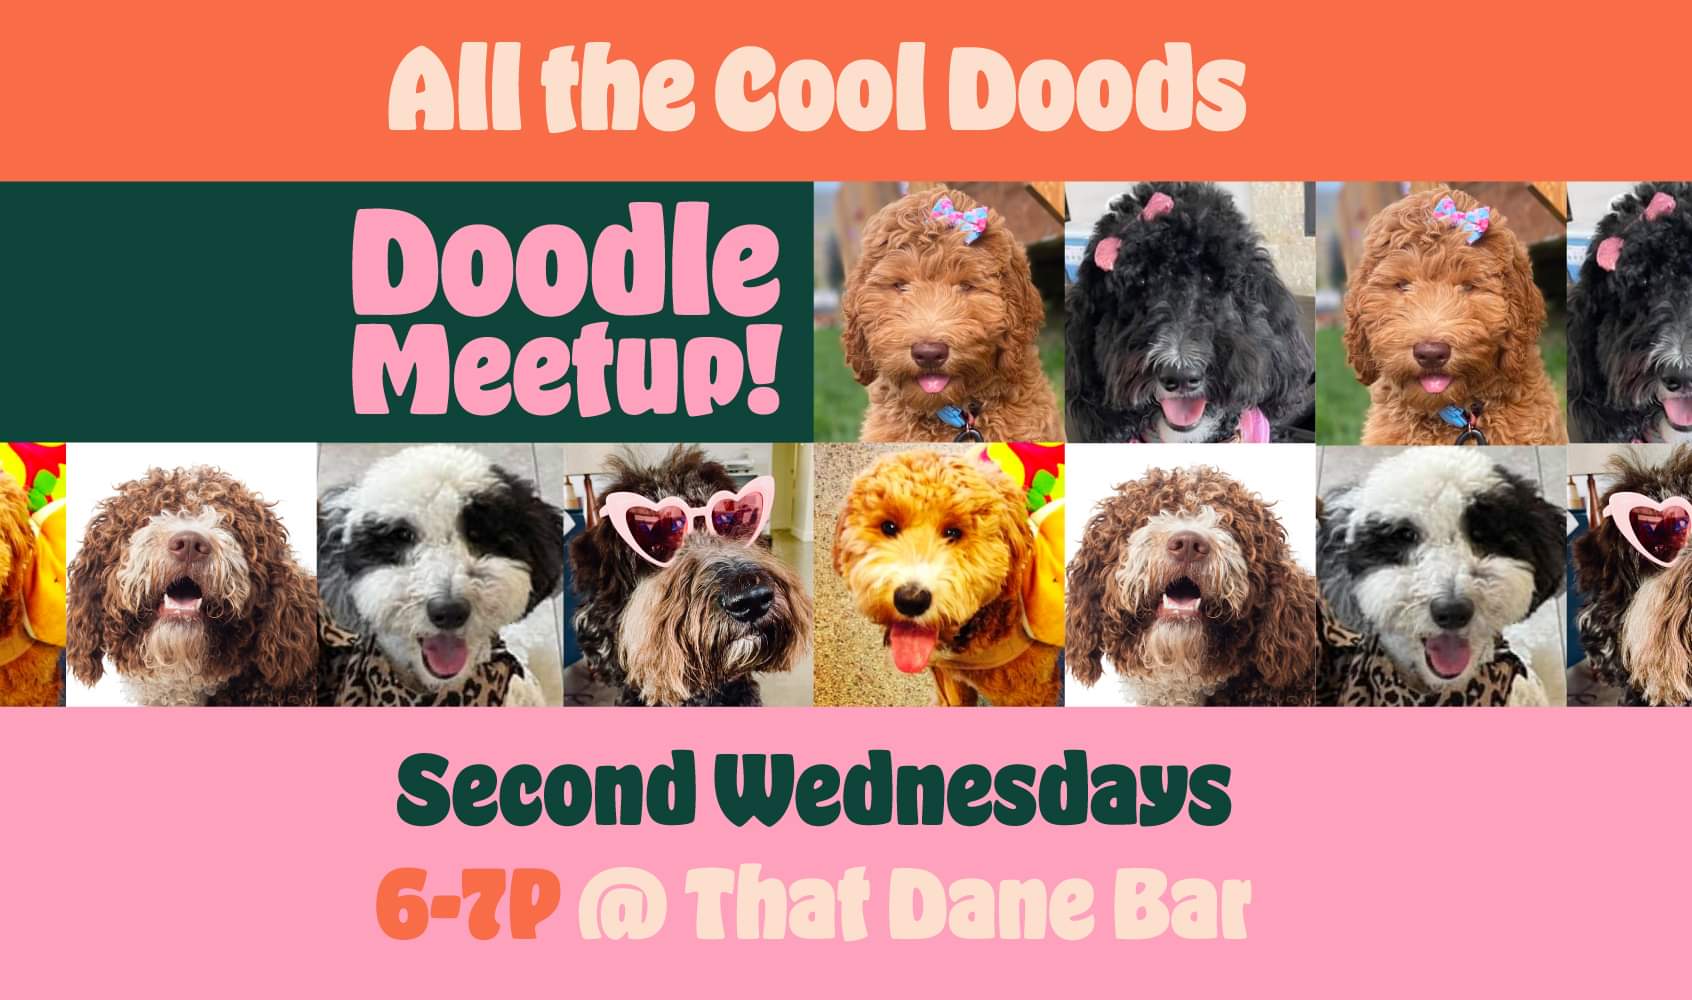 ALL The Cool “Doods” Doodle Meet Up